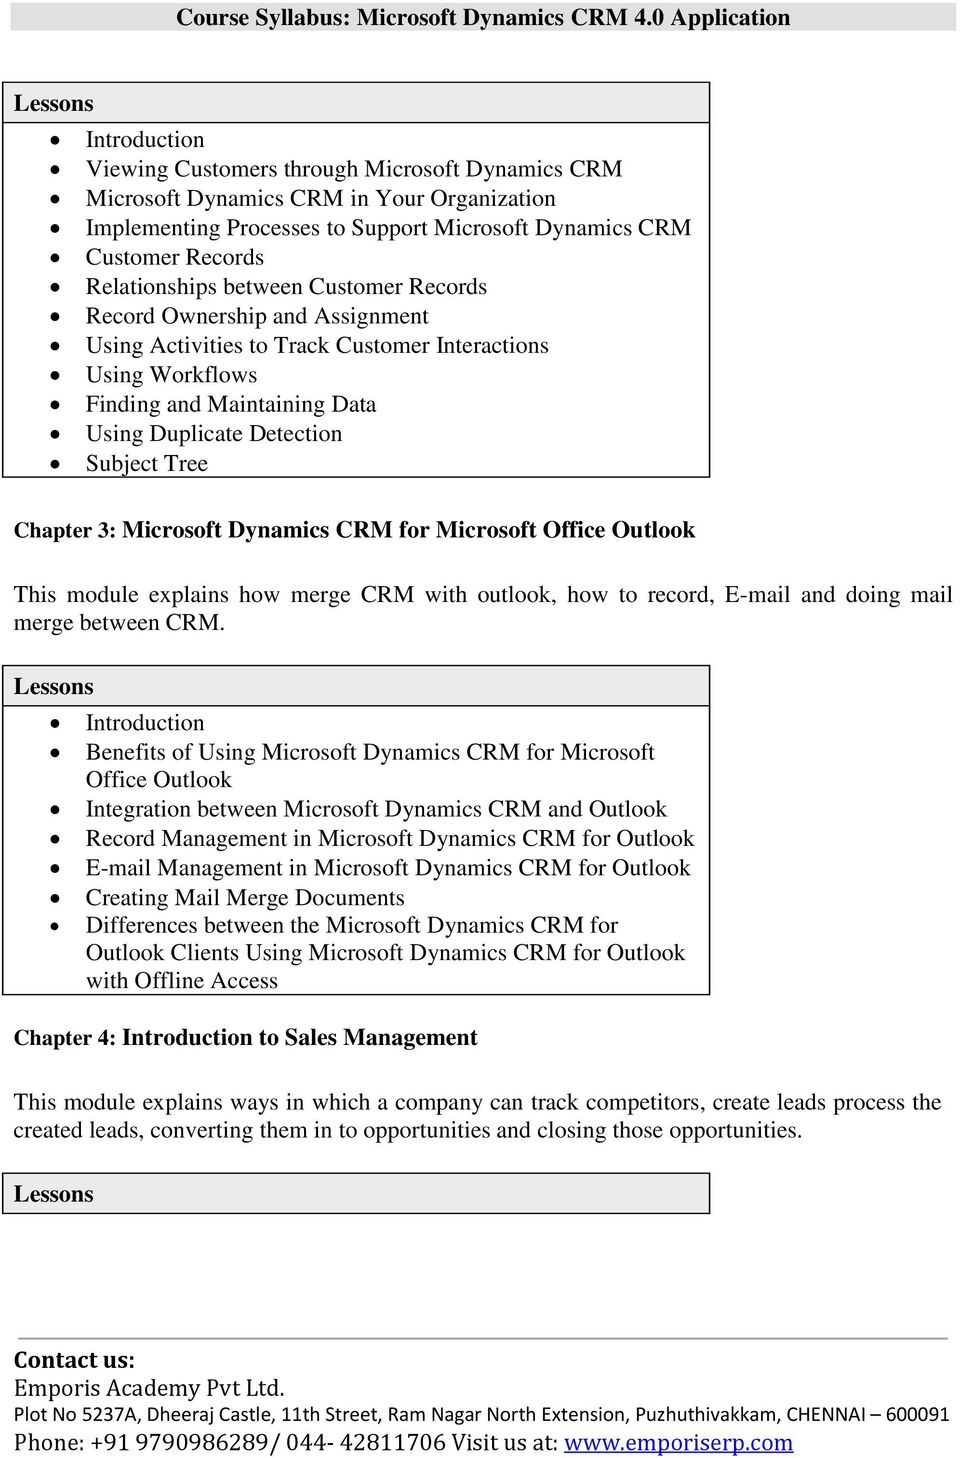 Dynamics CRM for Microsoft Office Outlook This module explains how merge CRM with outlook, how to record, E-mail and doing mail merge between CRM.